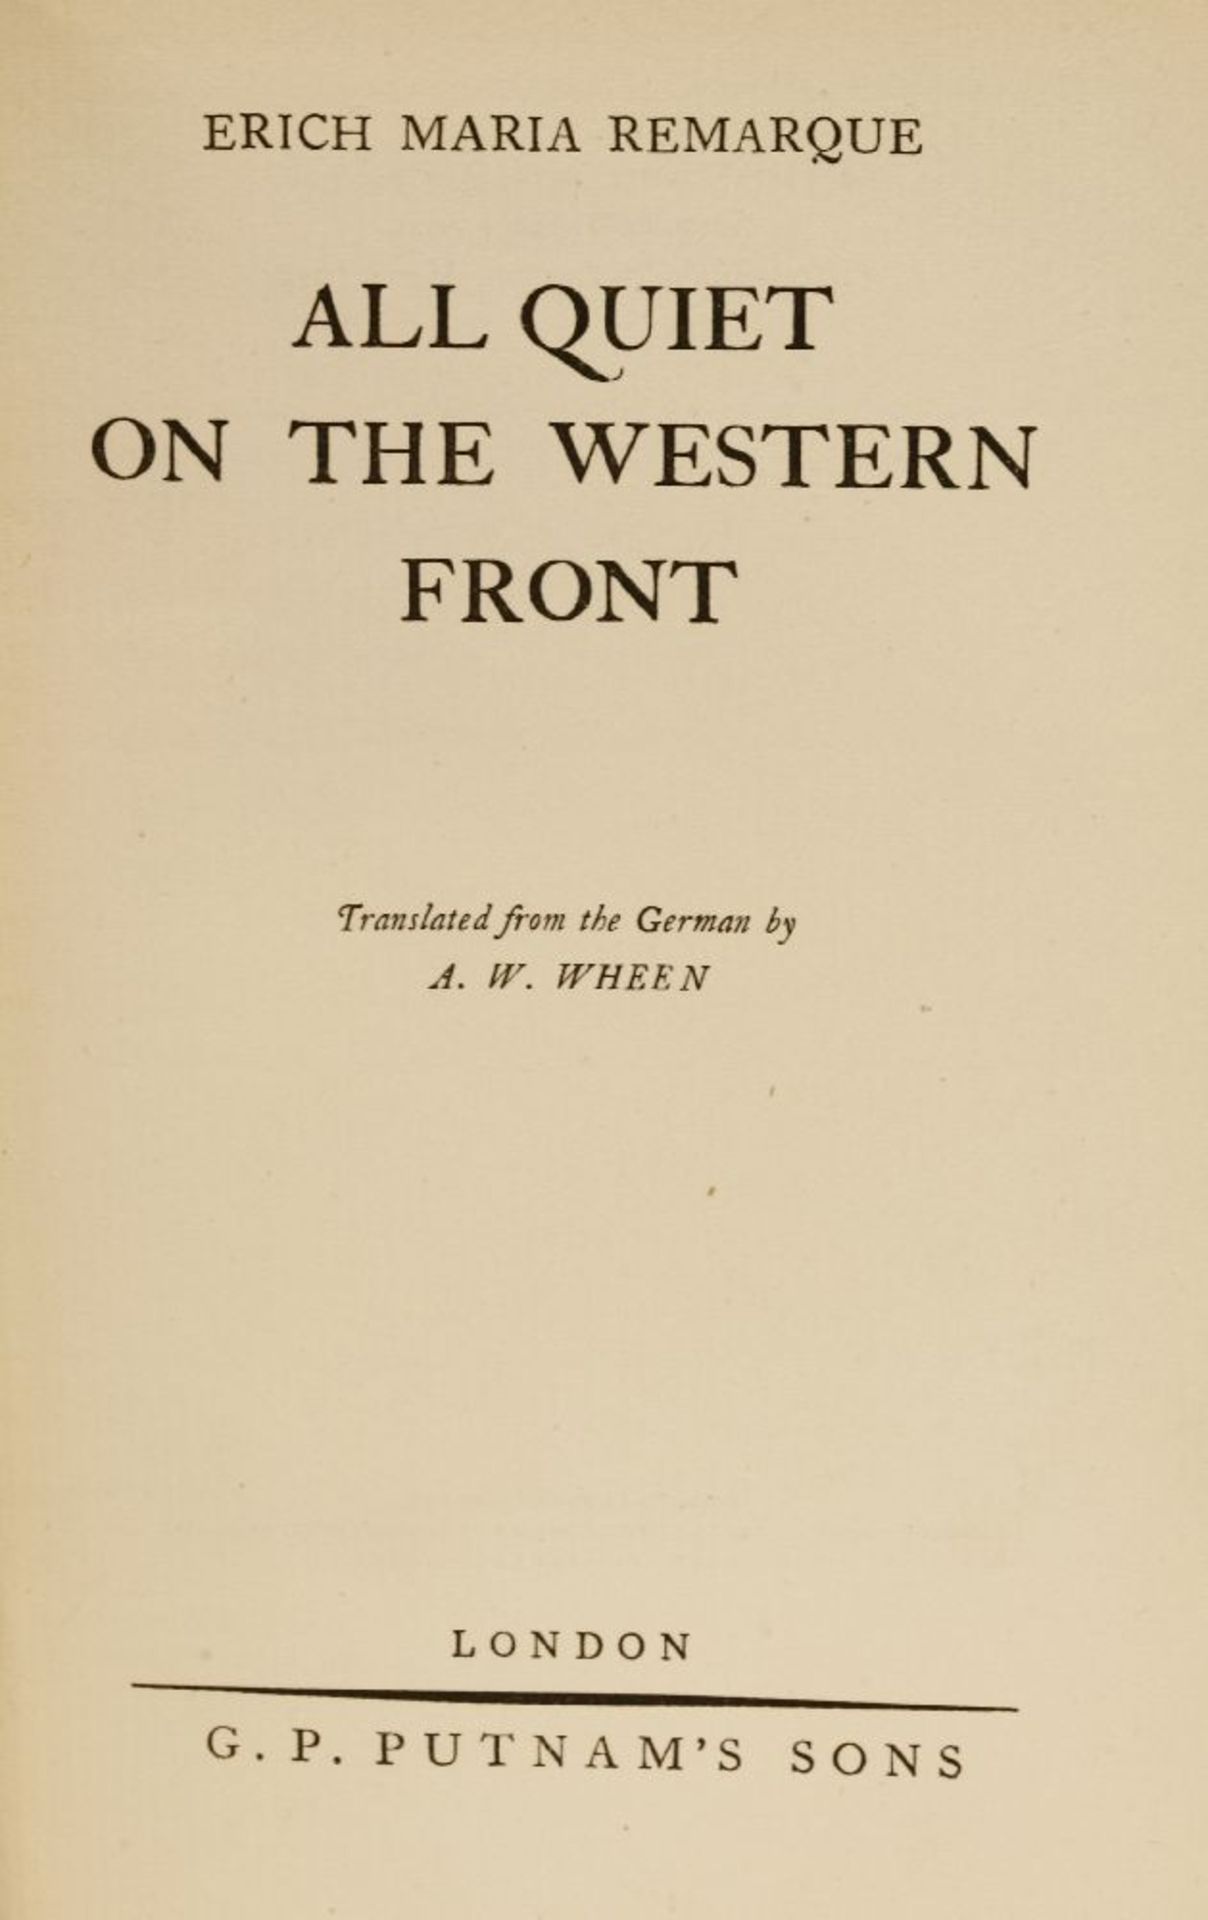 Remarque, Erich Maria: All Quiet on the Western Front. L, Putnam's Sons, 1929, First English edition - Image 2 of 2